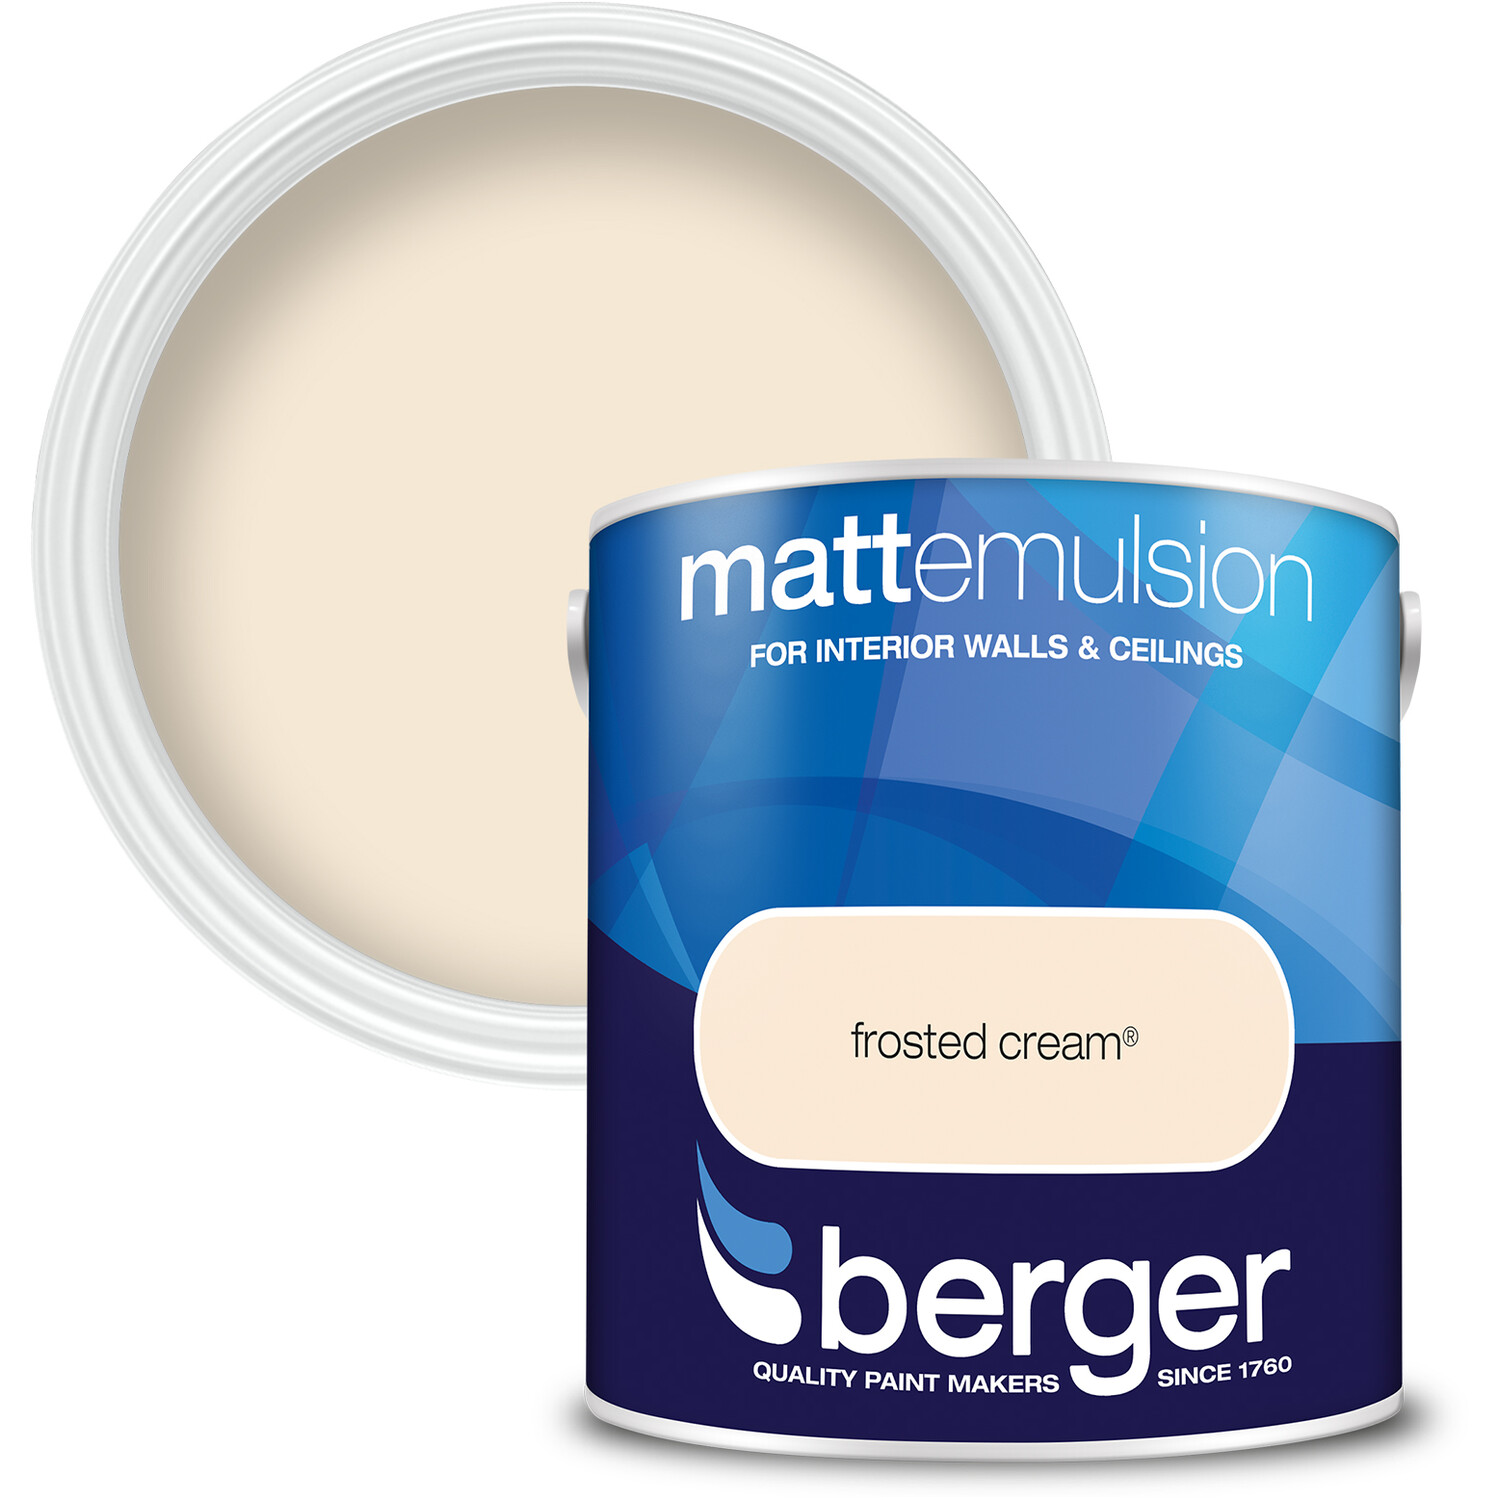 Berger Walls and Ceilings Frosted Cream Matt Emulsion Paint 2.5L Image 1